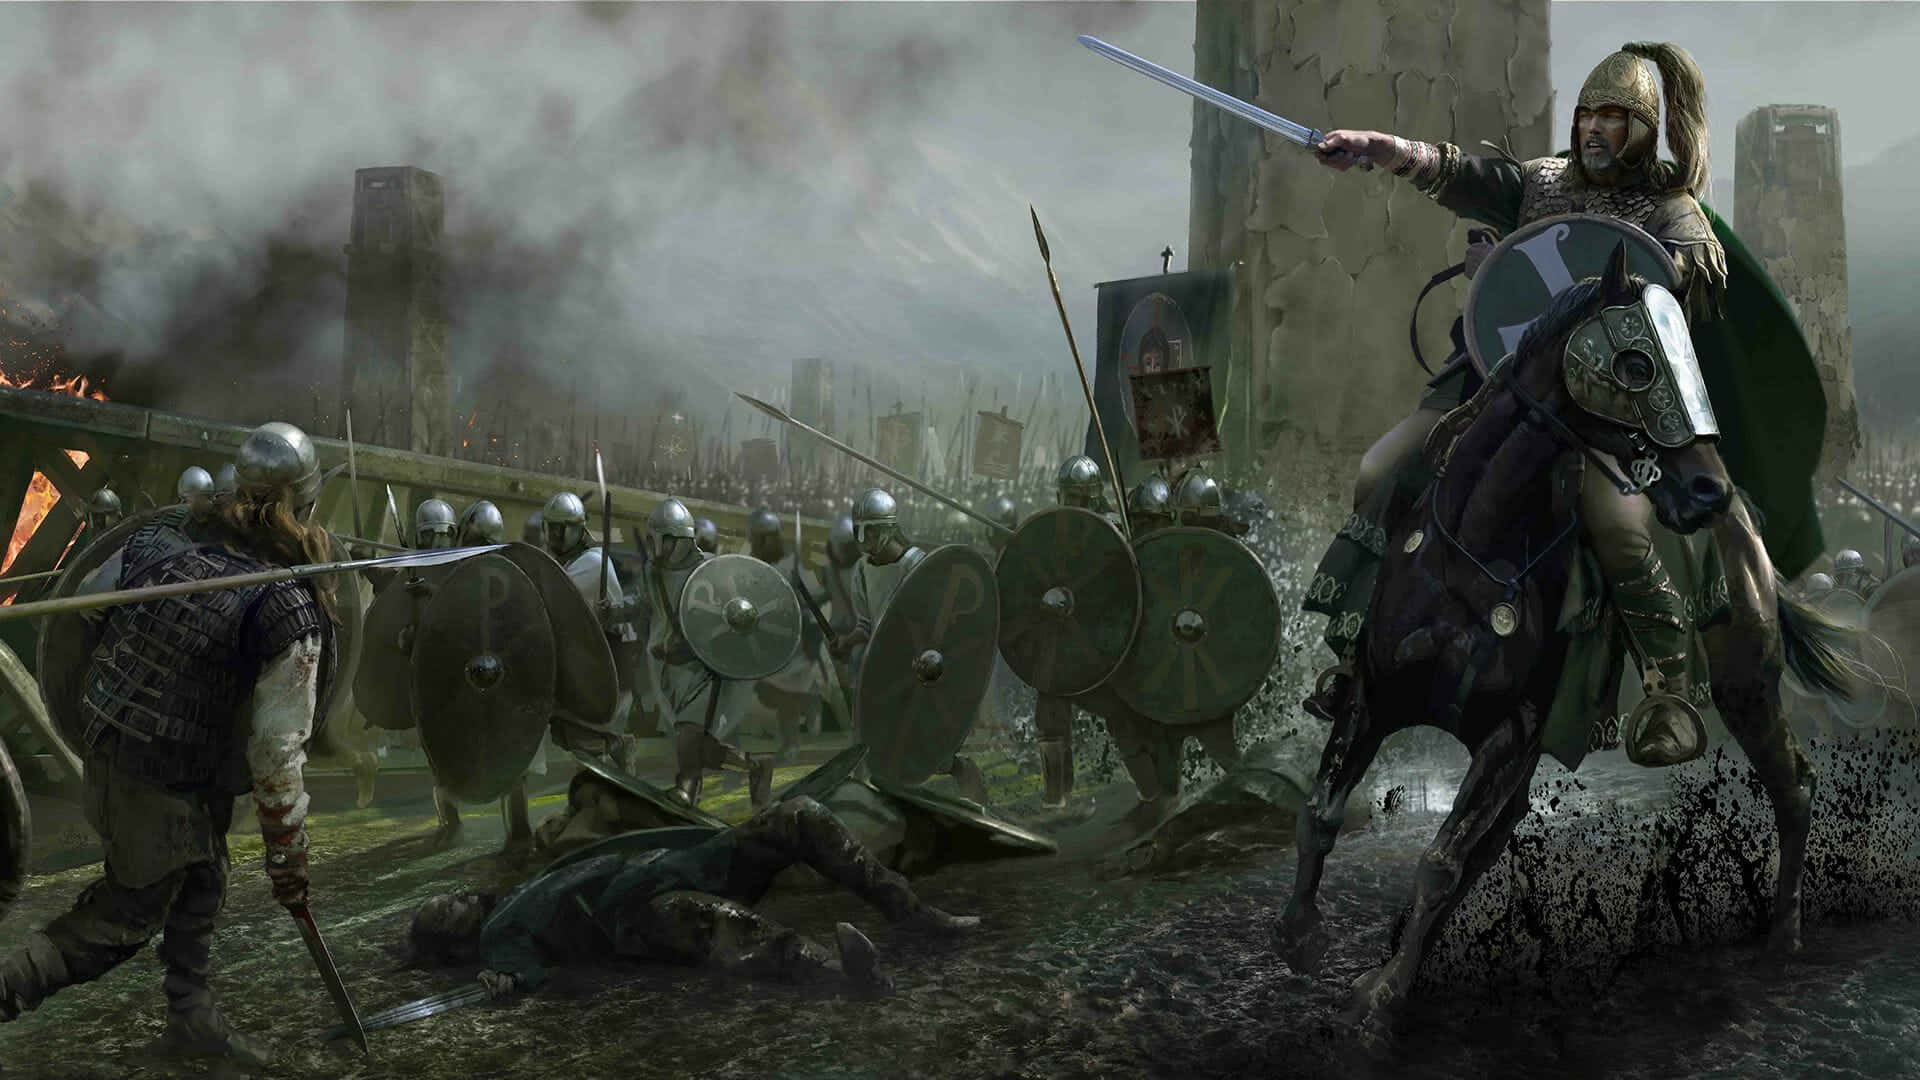 A Painting Of A Battle Between Knights And Soldiers